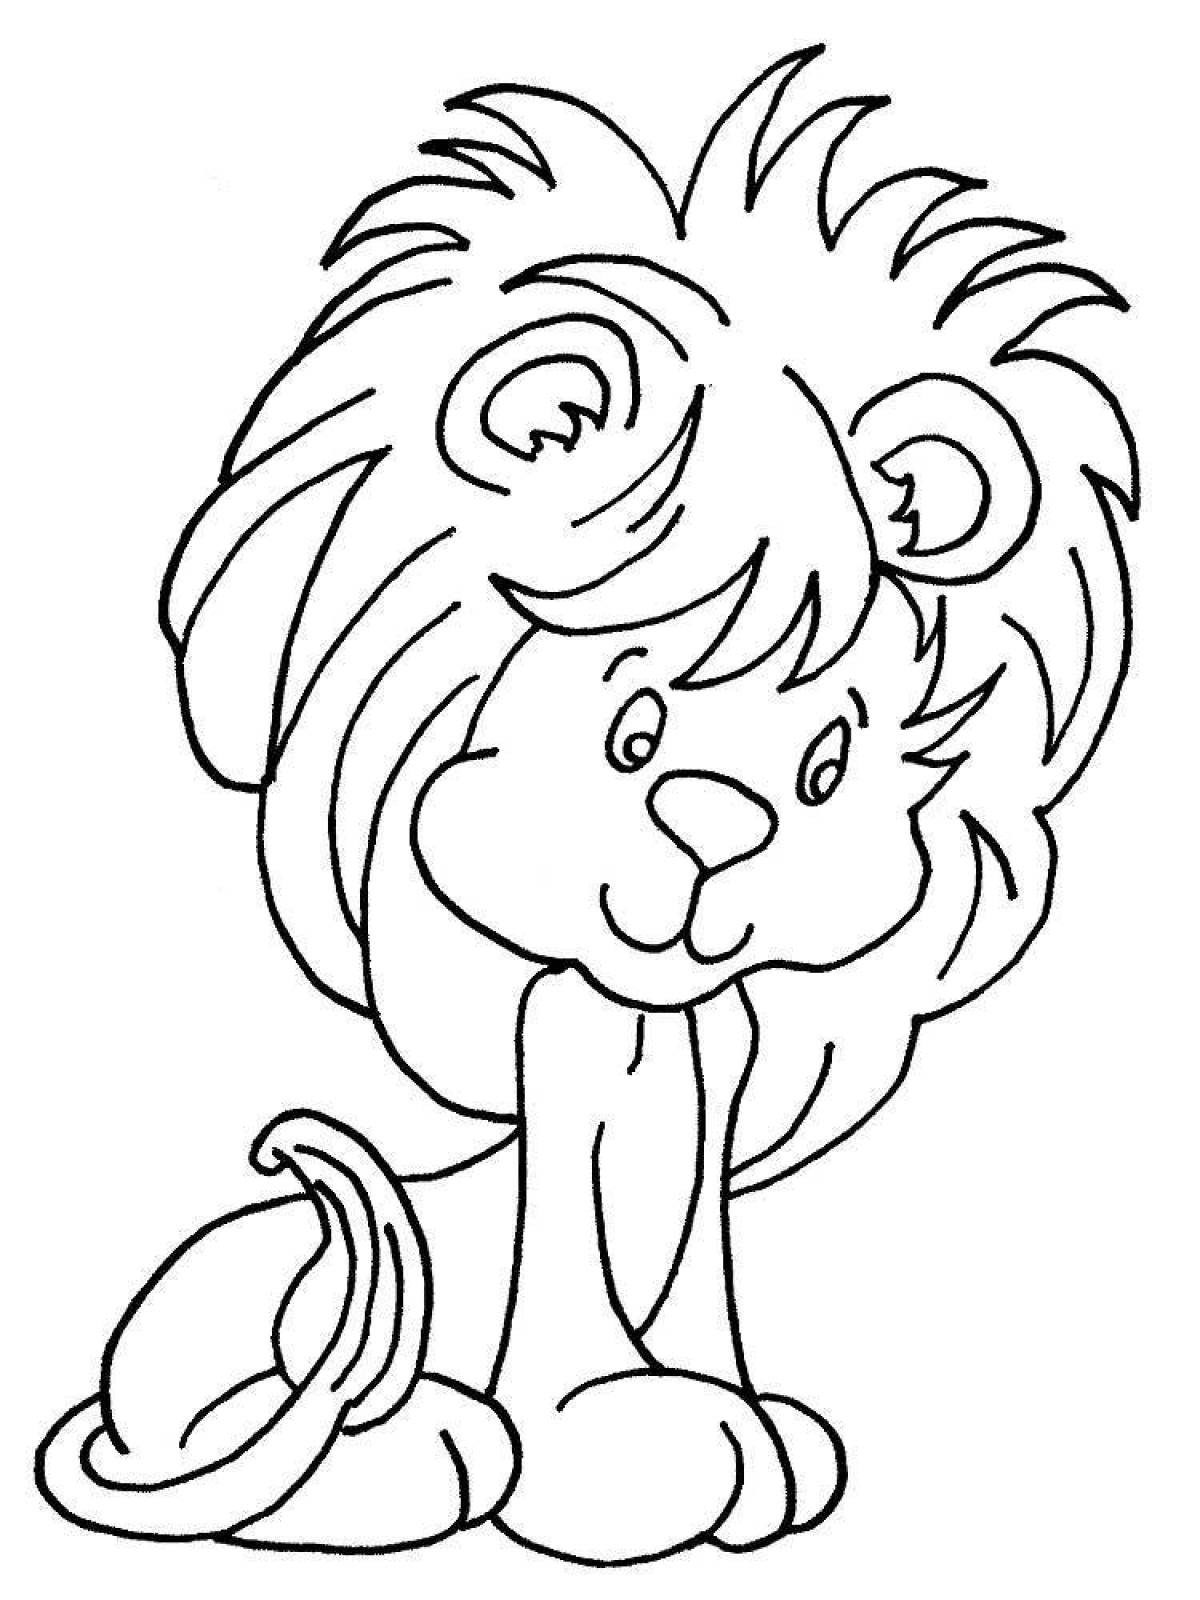 Coloring page twinkling lion cub